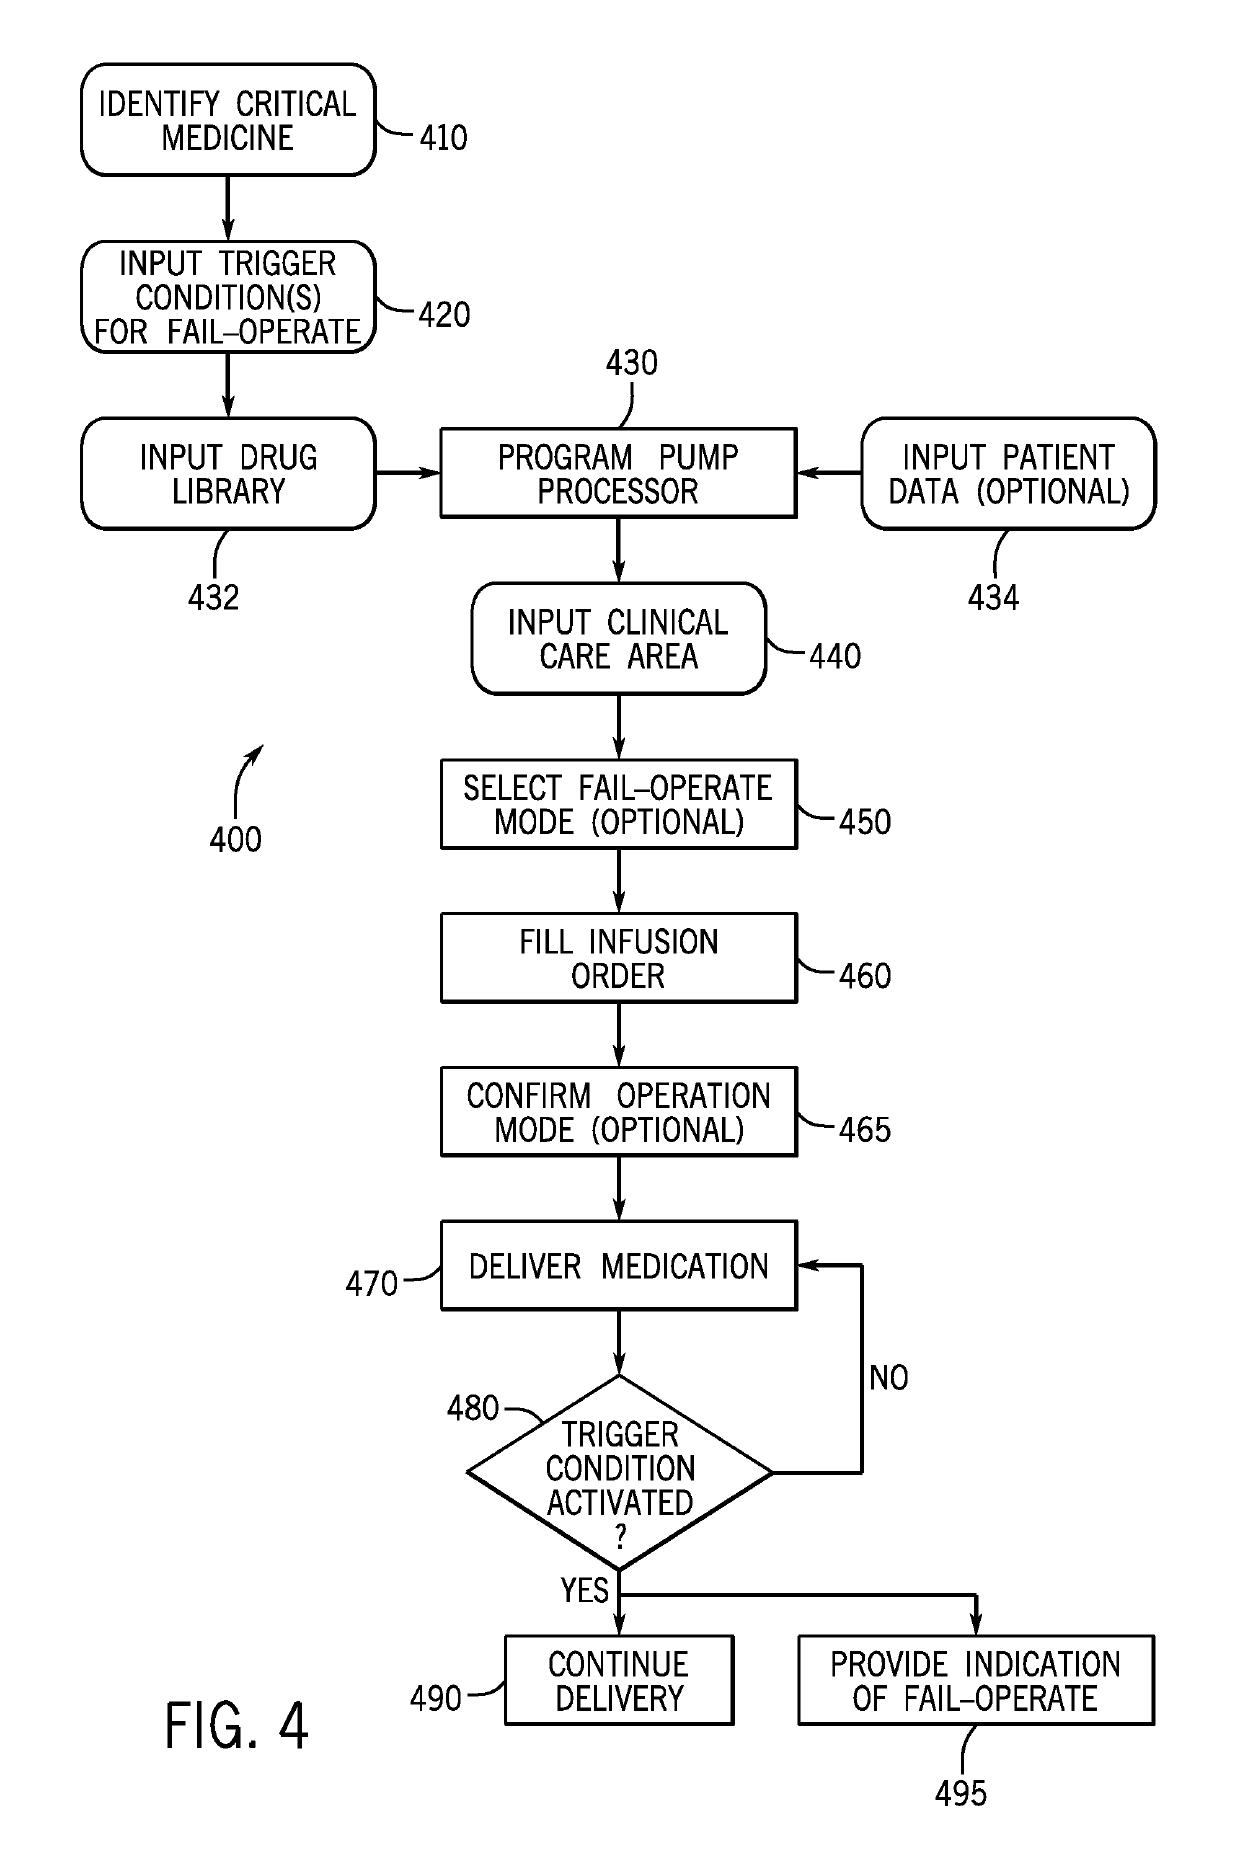 Patient care system for critical medications